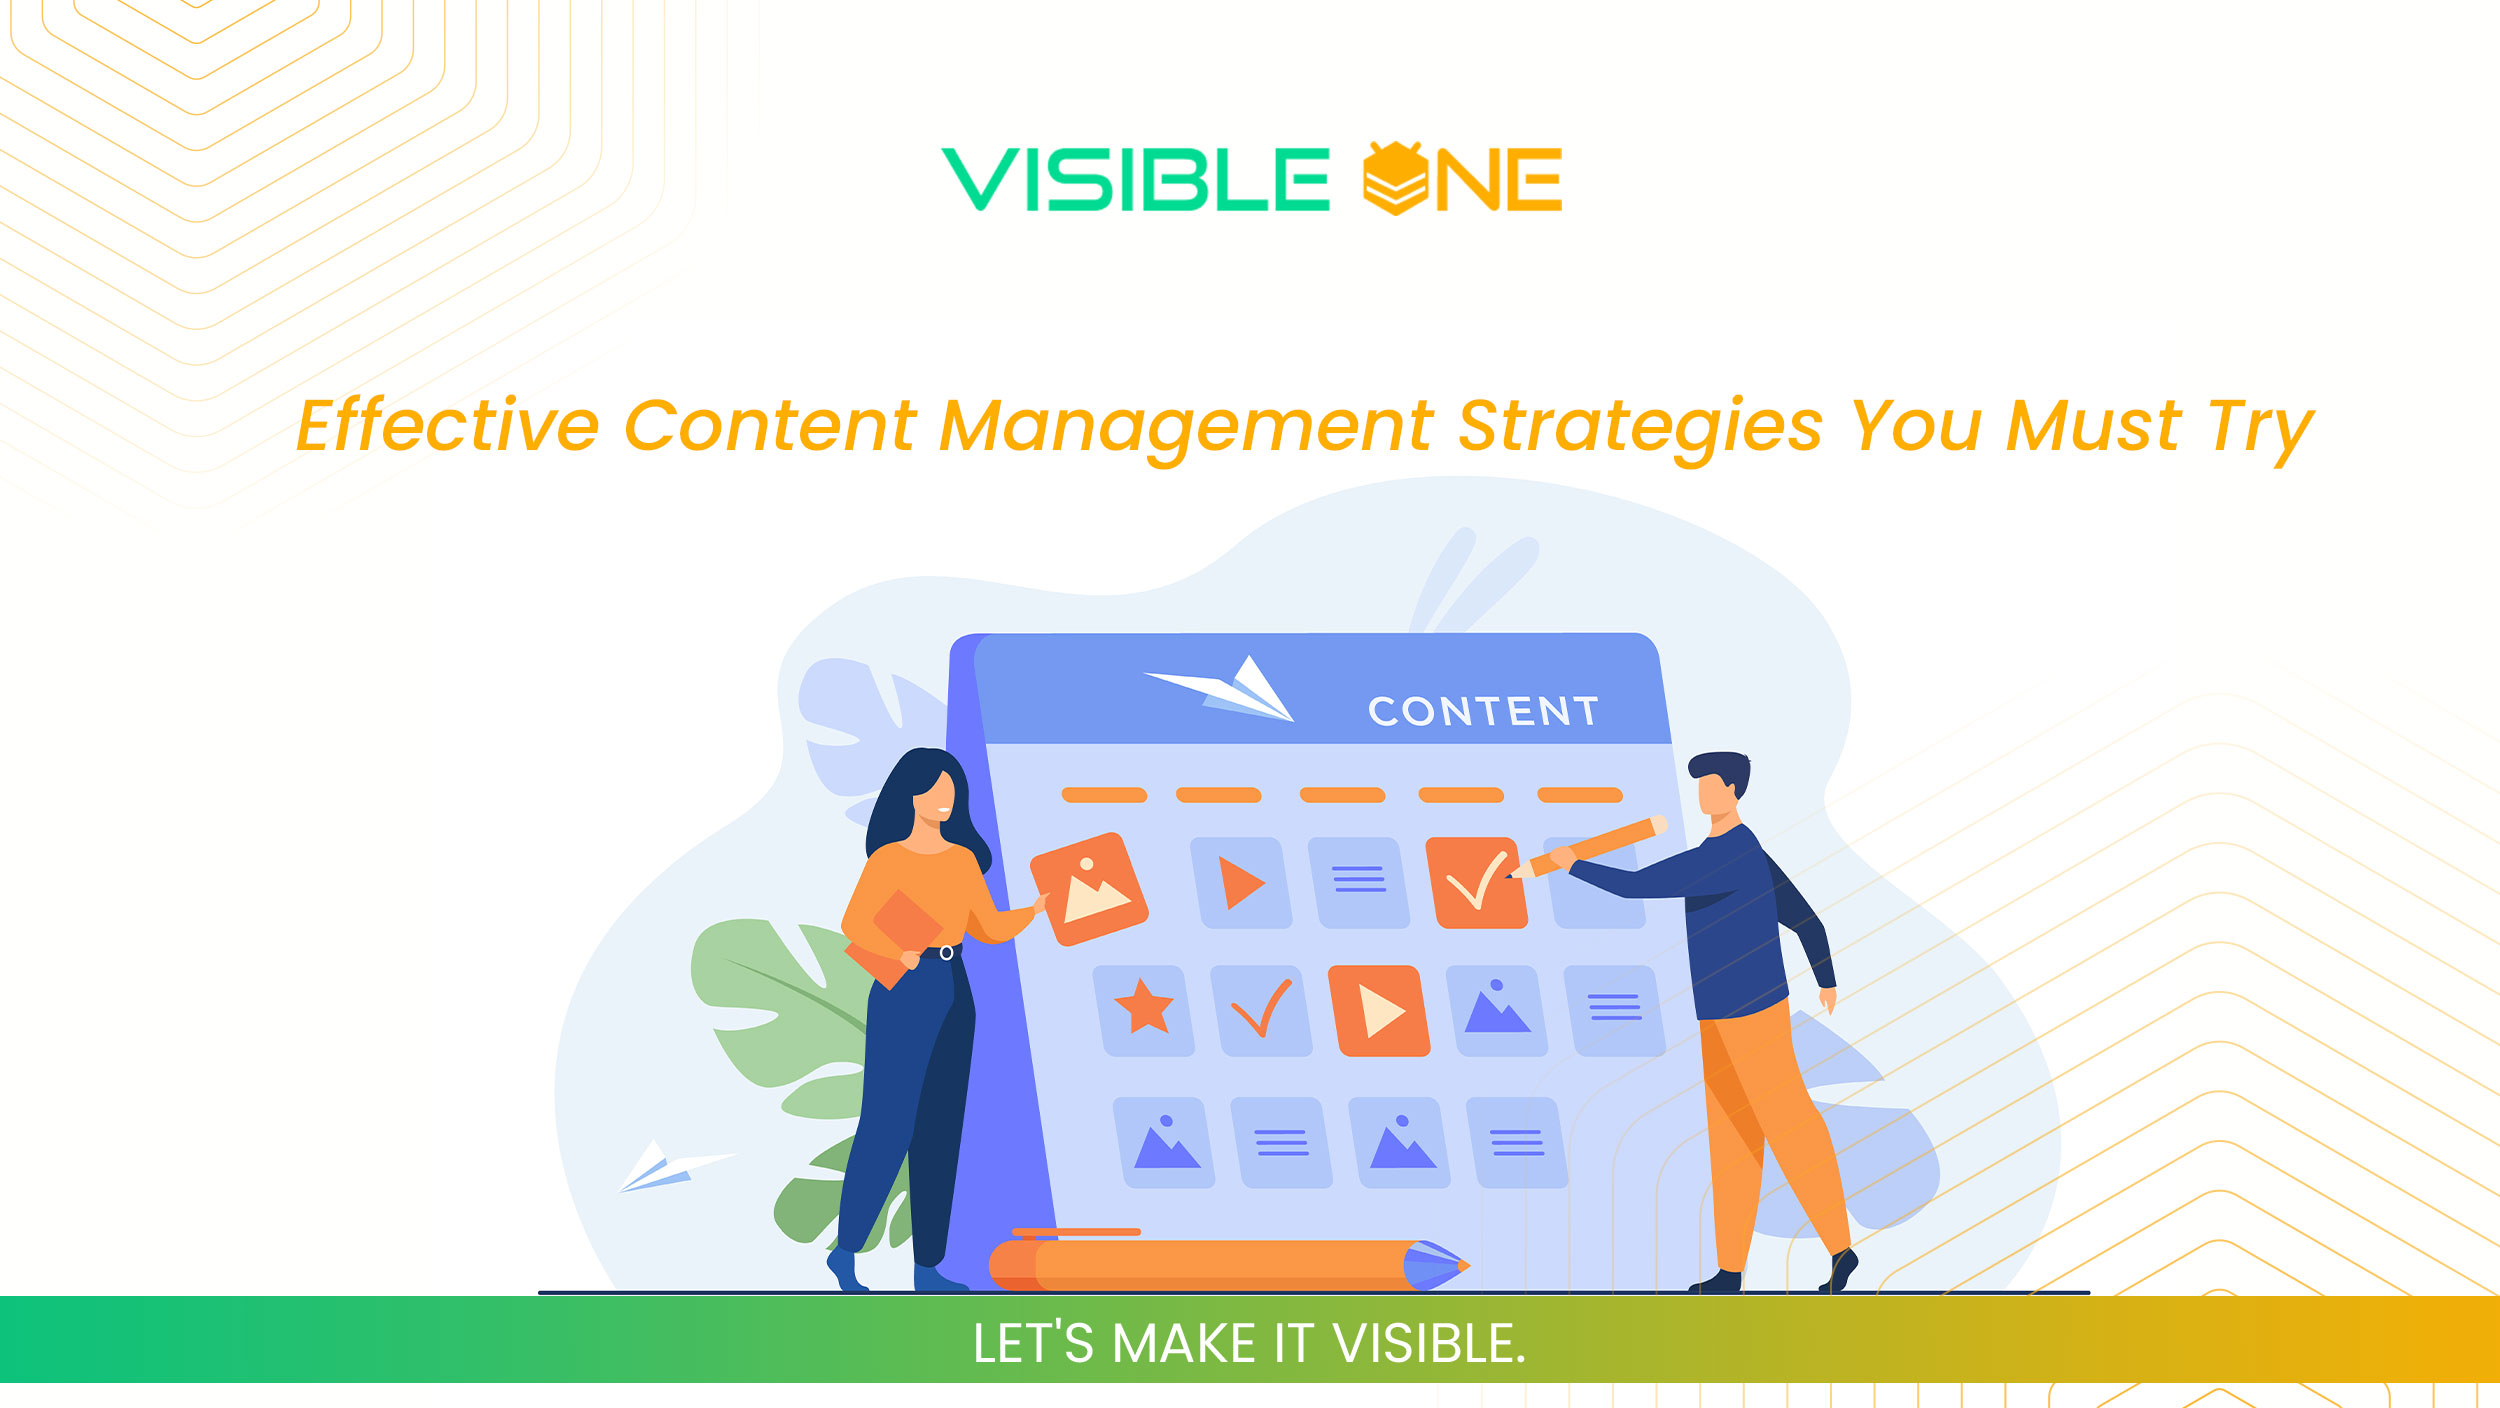 Effective Content Management Strategies You Must Try